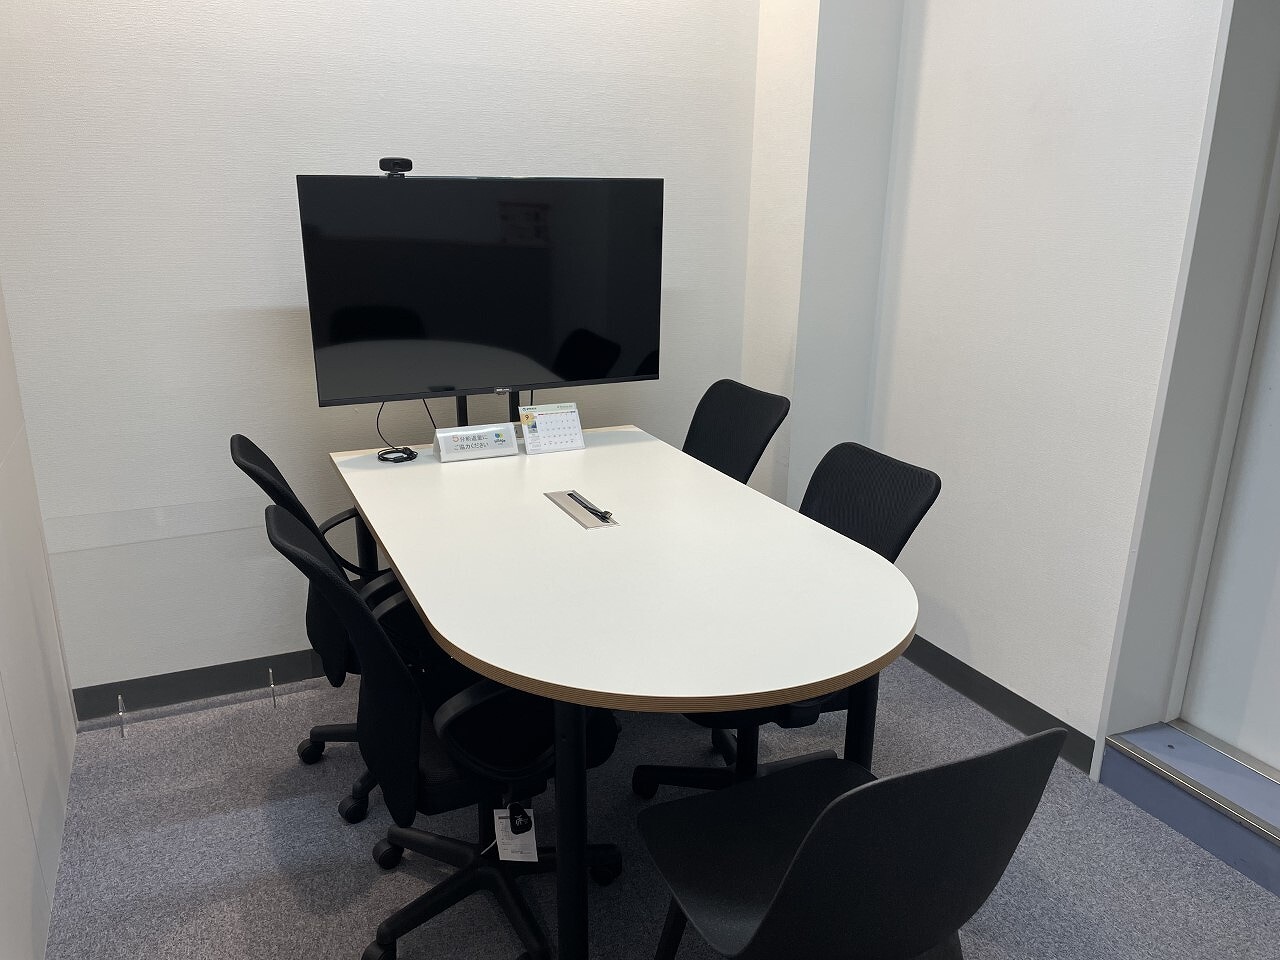 Common Area_Meeting Room. up to 2 hours per member per week free of charge.